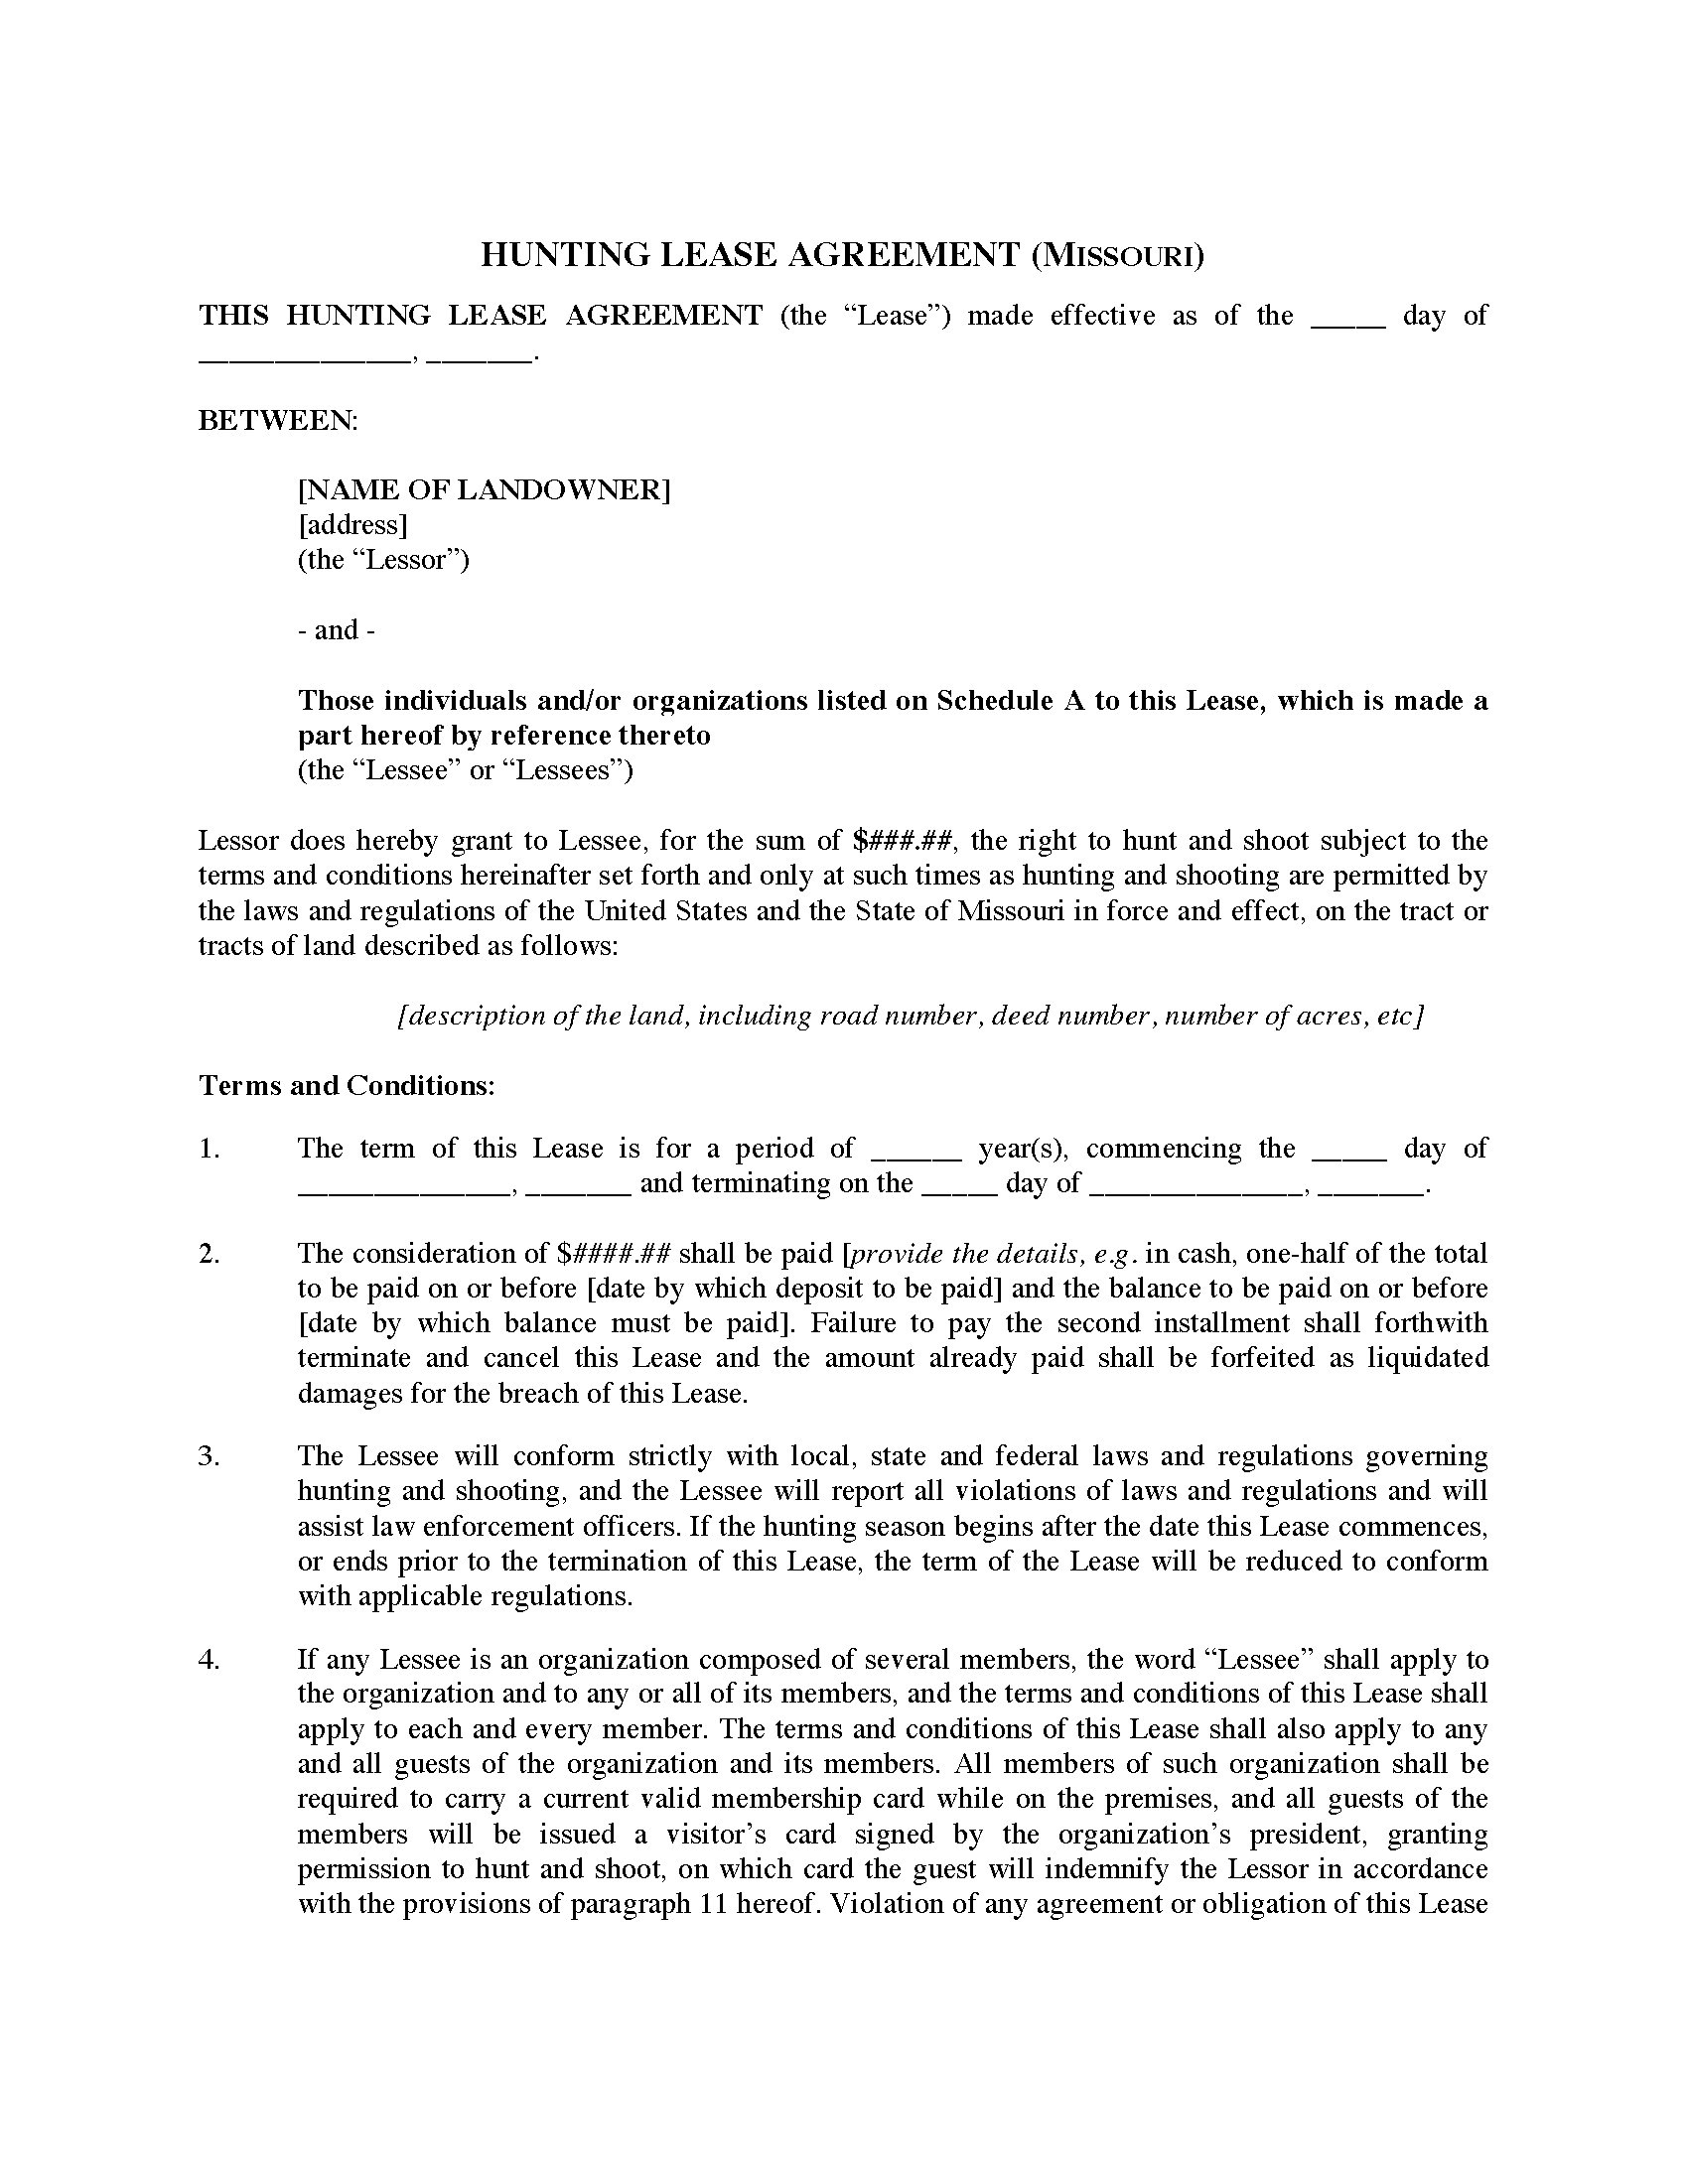 Missouri Hunting Lease Agreement Legal Forms And Business Templates 